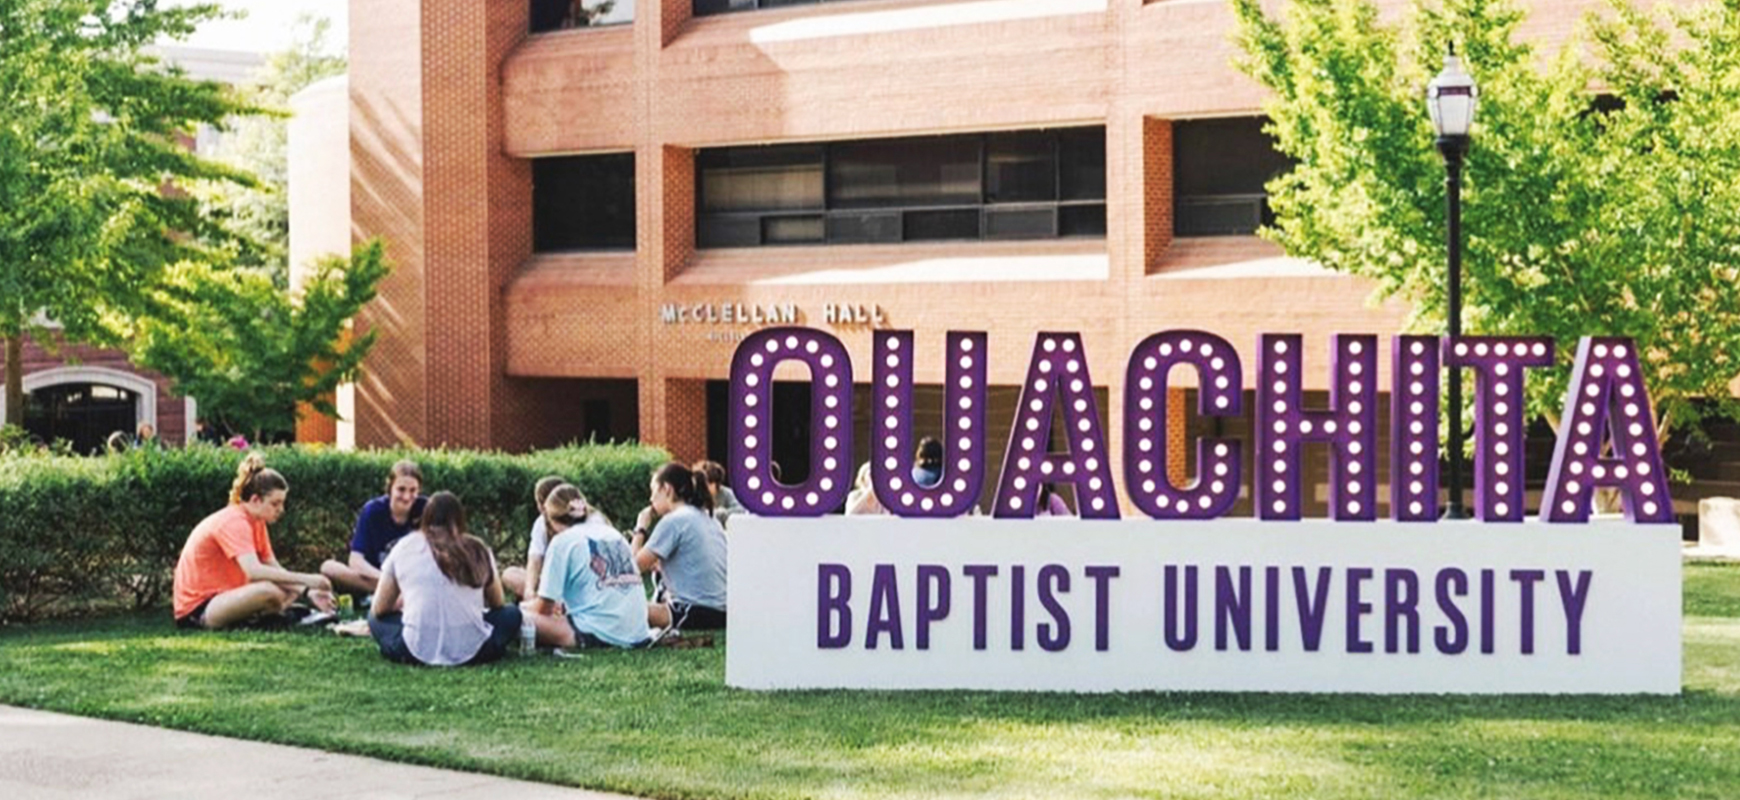 Ouachita Baptist University marquee sign in a monumental style made of aluminum and acrylic